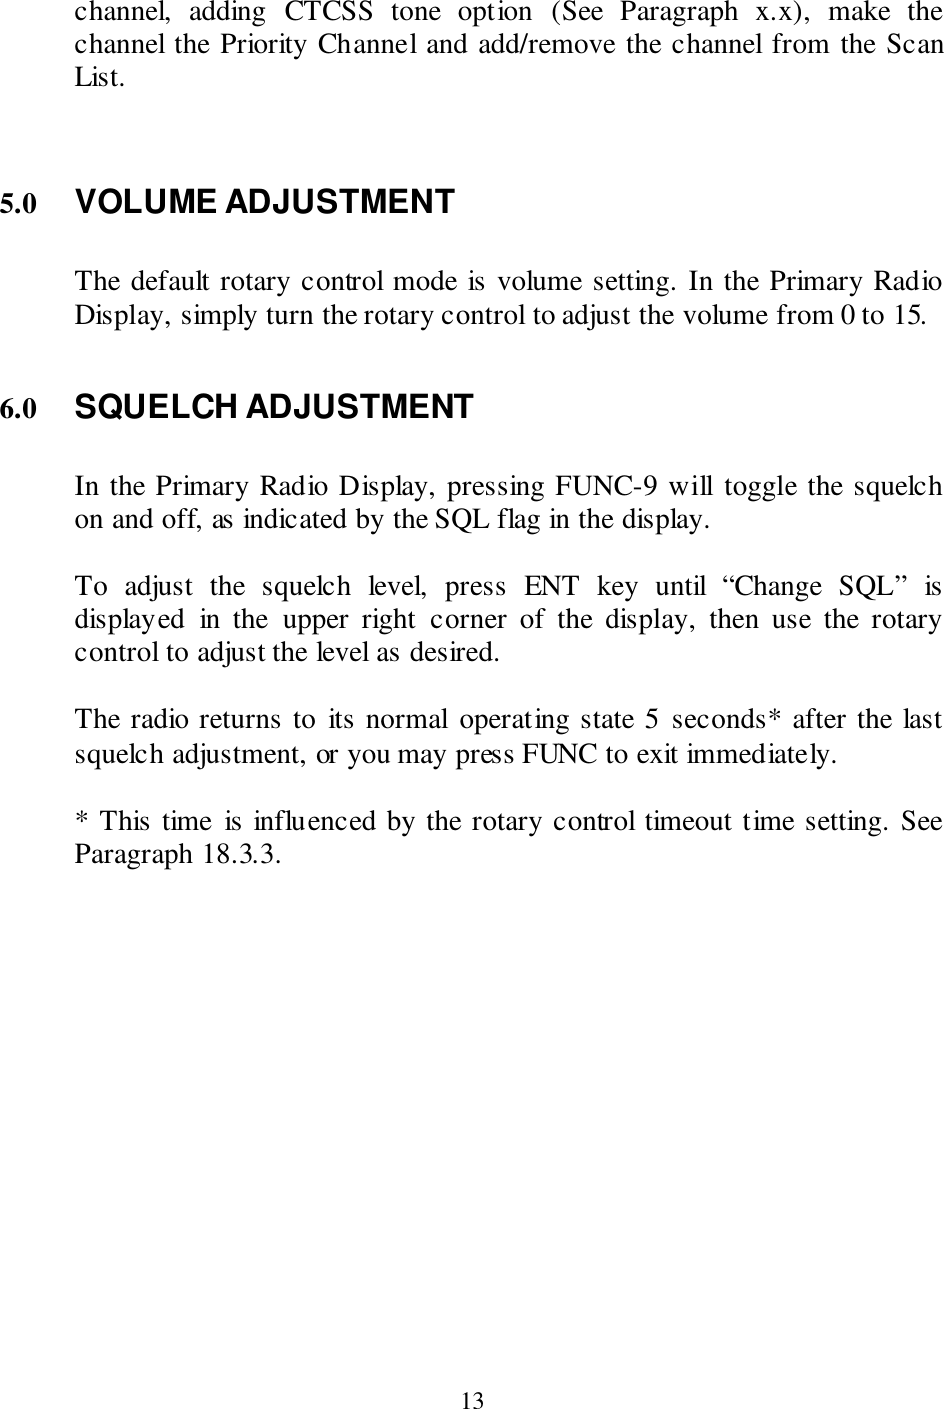  13 channel,  adding  CTCSS  tone  option  (See  Paragraph  x.x),  make  the channel the Priority Channel and add/remove the channel from the Scan List.   5.0 VOLUME ADJUSTMENT  The default rotary control mode is volume setting. In the Primary Radio Display, simply turn the rotary control to adjust the volume from 0 to 15.   6.0 SQUELCH ADJUSTMENT  In the Primary Radio Display, pressing FUNC-9 will toggle the squelch on and off, as indicated by the SQL flag in the display.   To  adjust  the  squelch  level,  press  ENT  key  until  “Change  SQL”  is displayed  in  the  upper  right  corner  of  the  display,  then  use  the  rotary control to adjust the level as desired.  The radio returns to  its normal operating state 5 seconds* after the last squelch adjustment, or you may press FUNC to exit immediately.  * This time  is influenced by the rotary control timeout time setting. See Paragraph 18.3.3. 